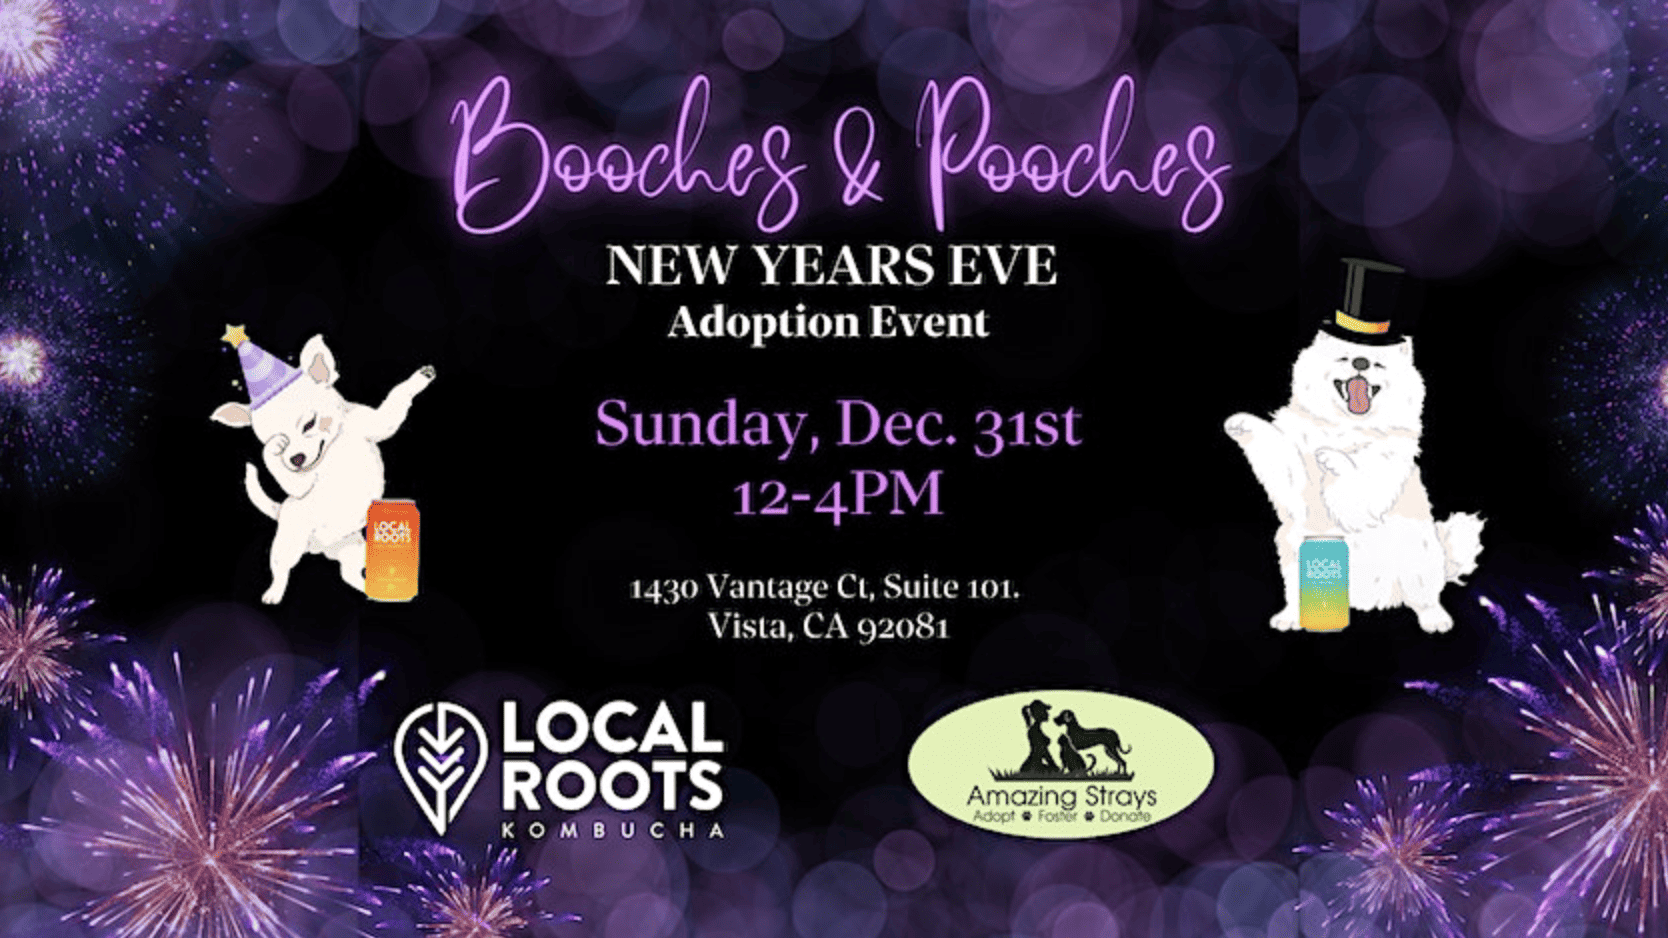 Booches & Pooches New Year's Eve Adoption Event